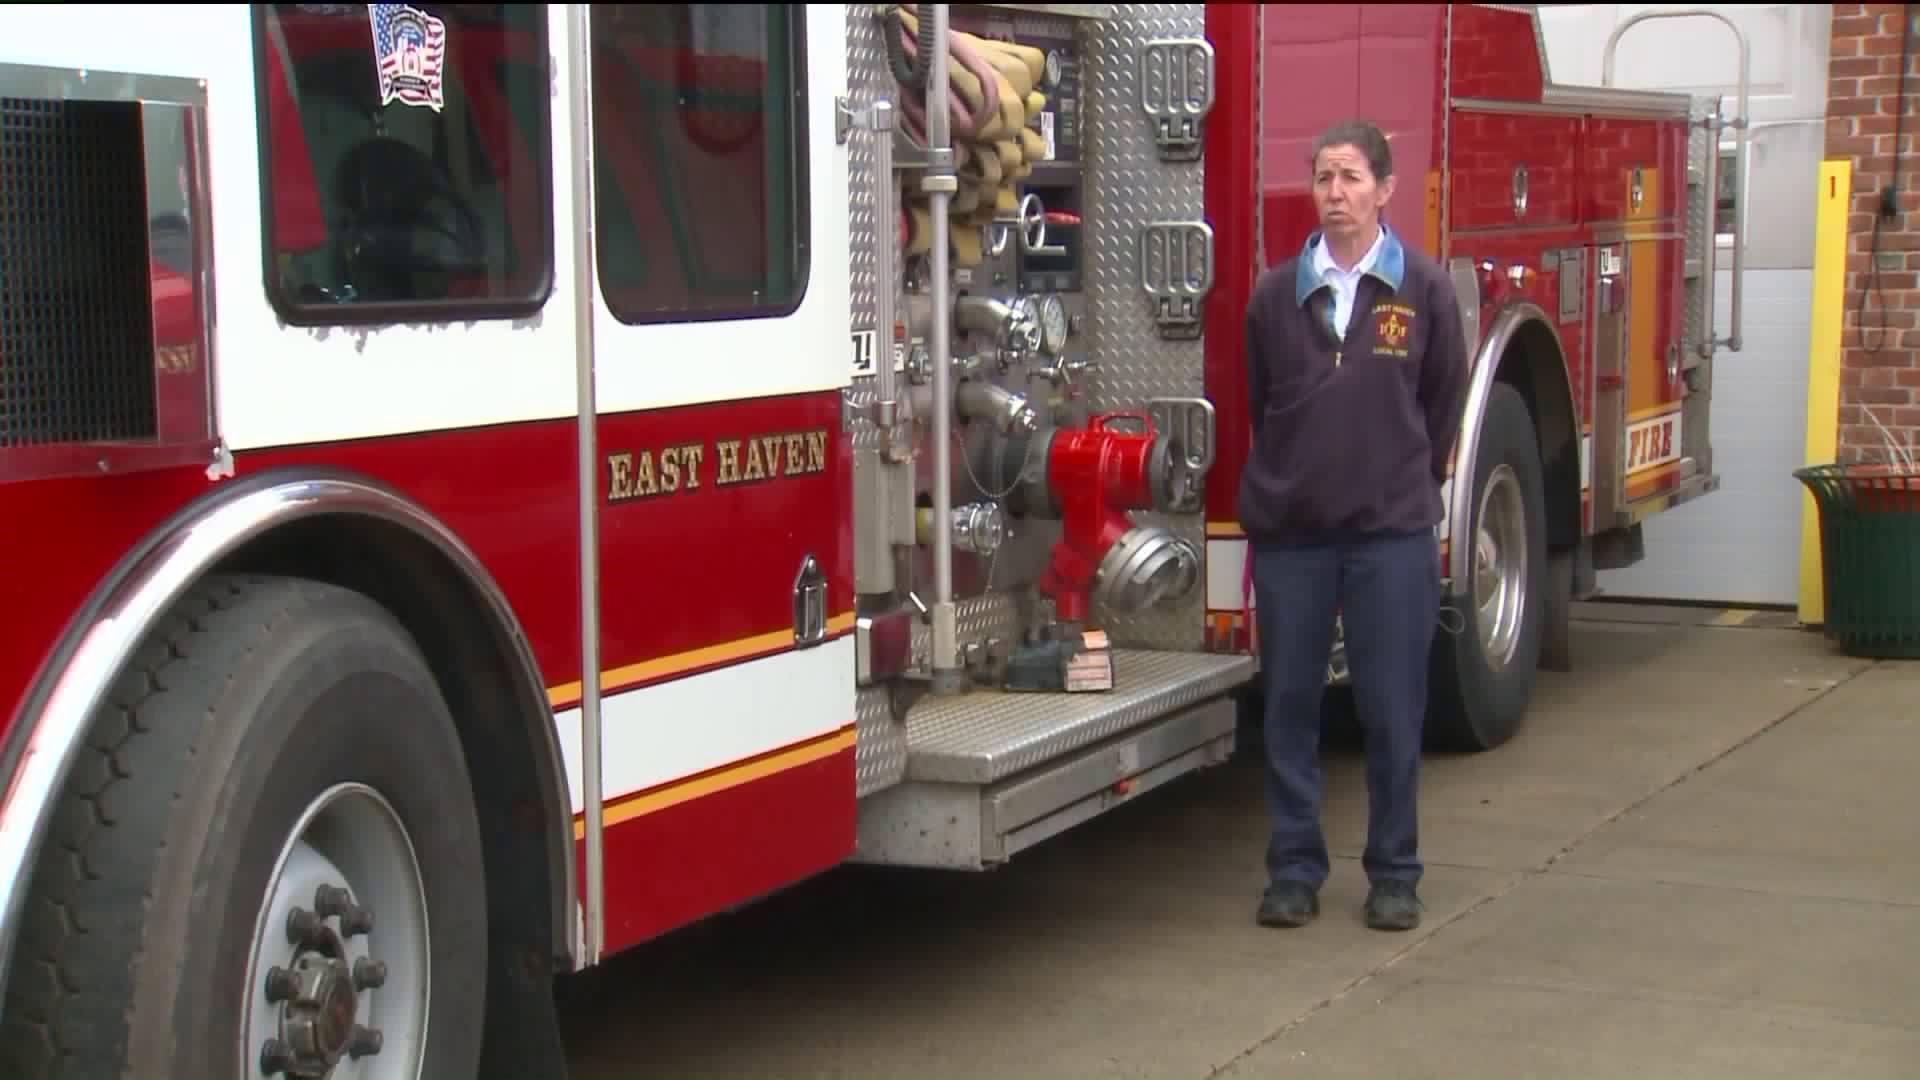 West Haven first responder talks about being at scene of plane crash